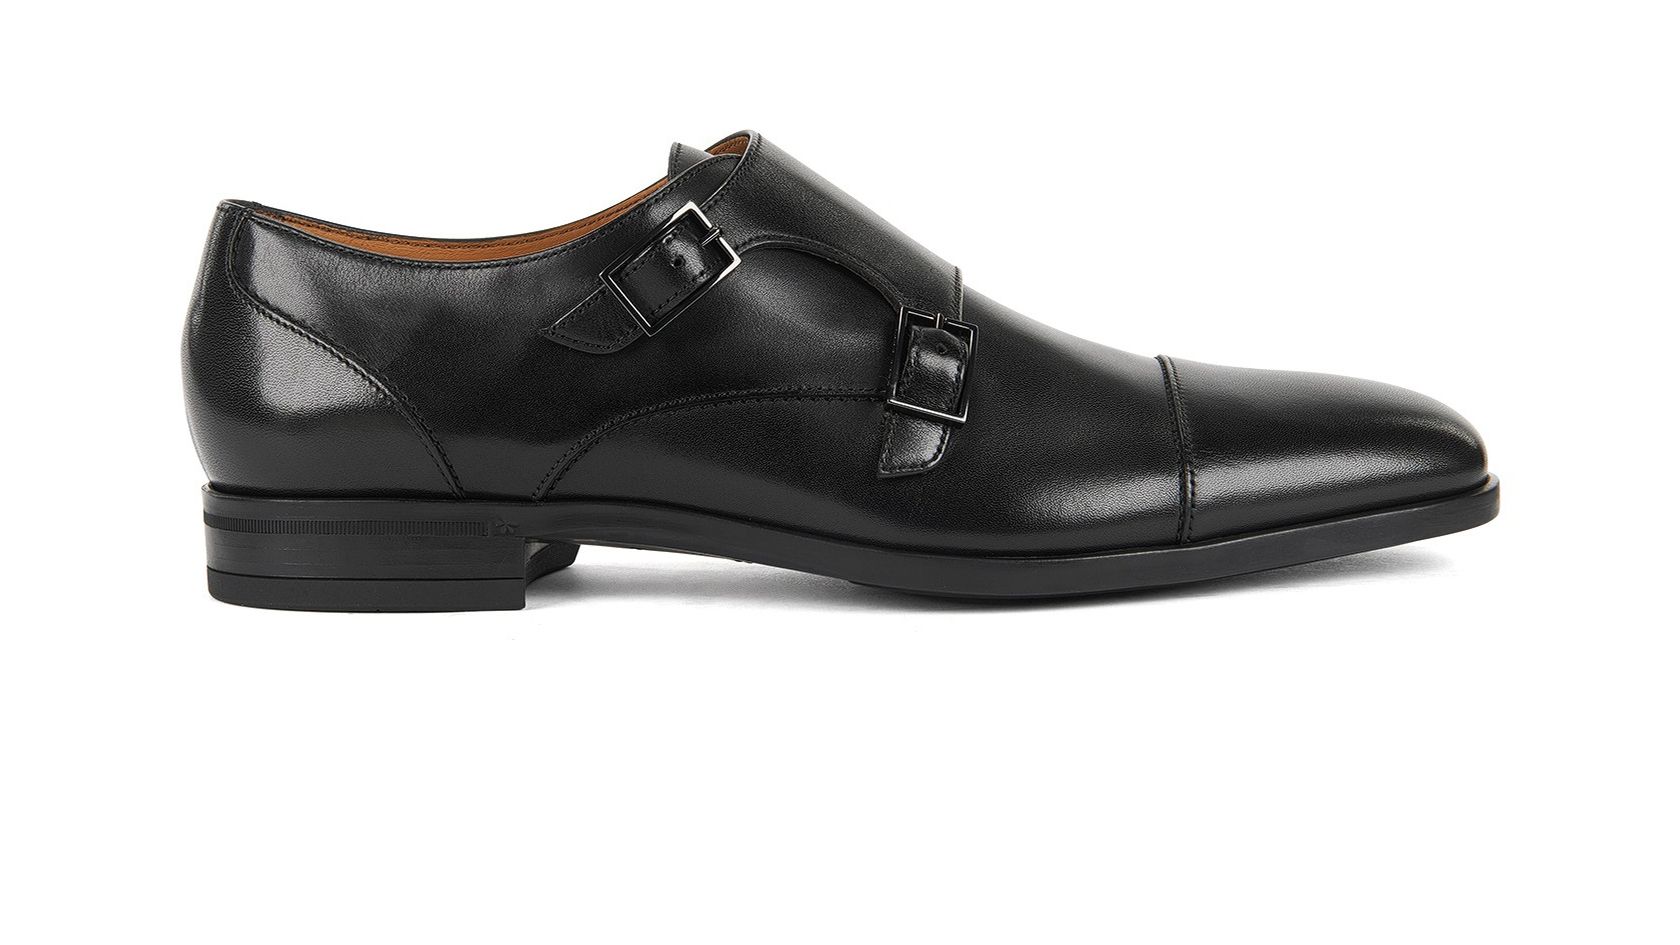 Introduction to Hugo Boss Dress Shoes